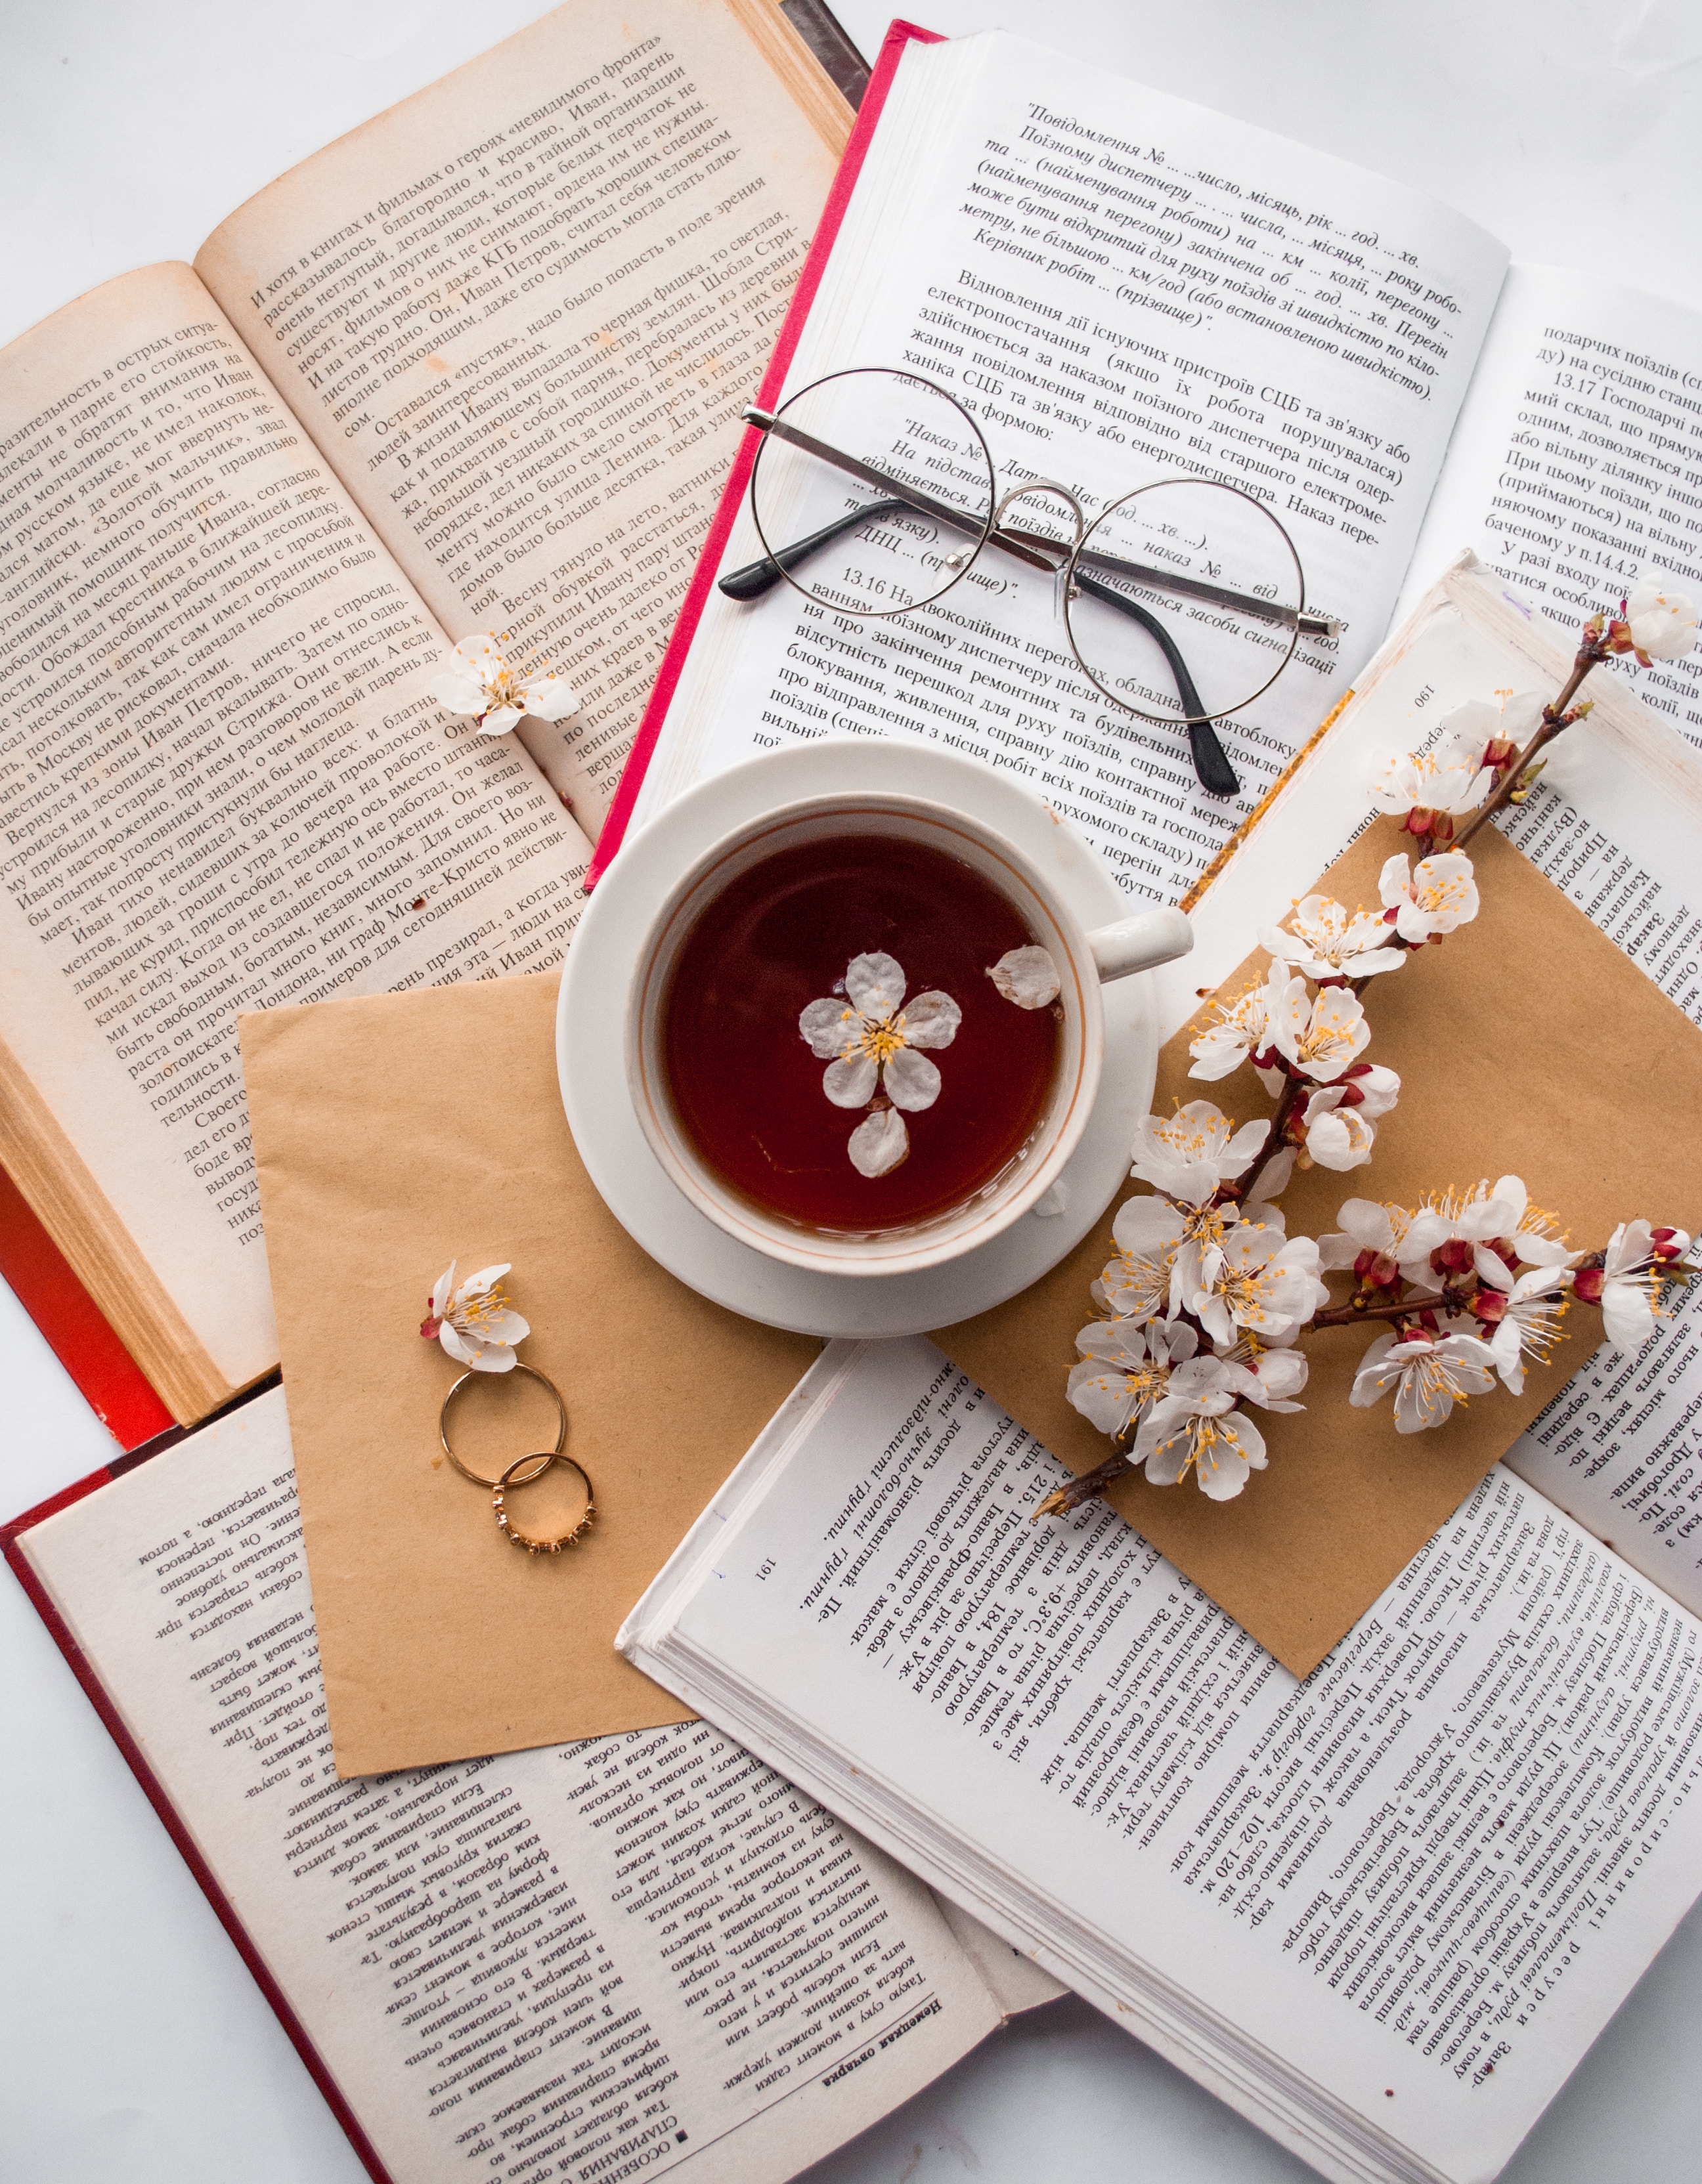 wallpapers books, cup, flowers, rings, miscellanea, miscellaneous, glasses, spectacles